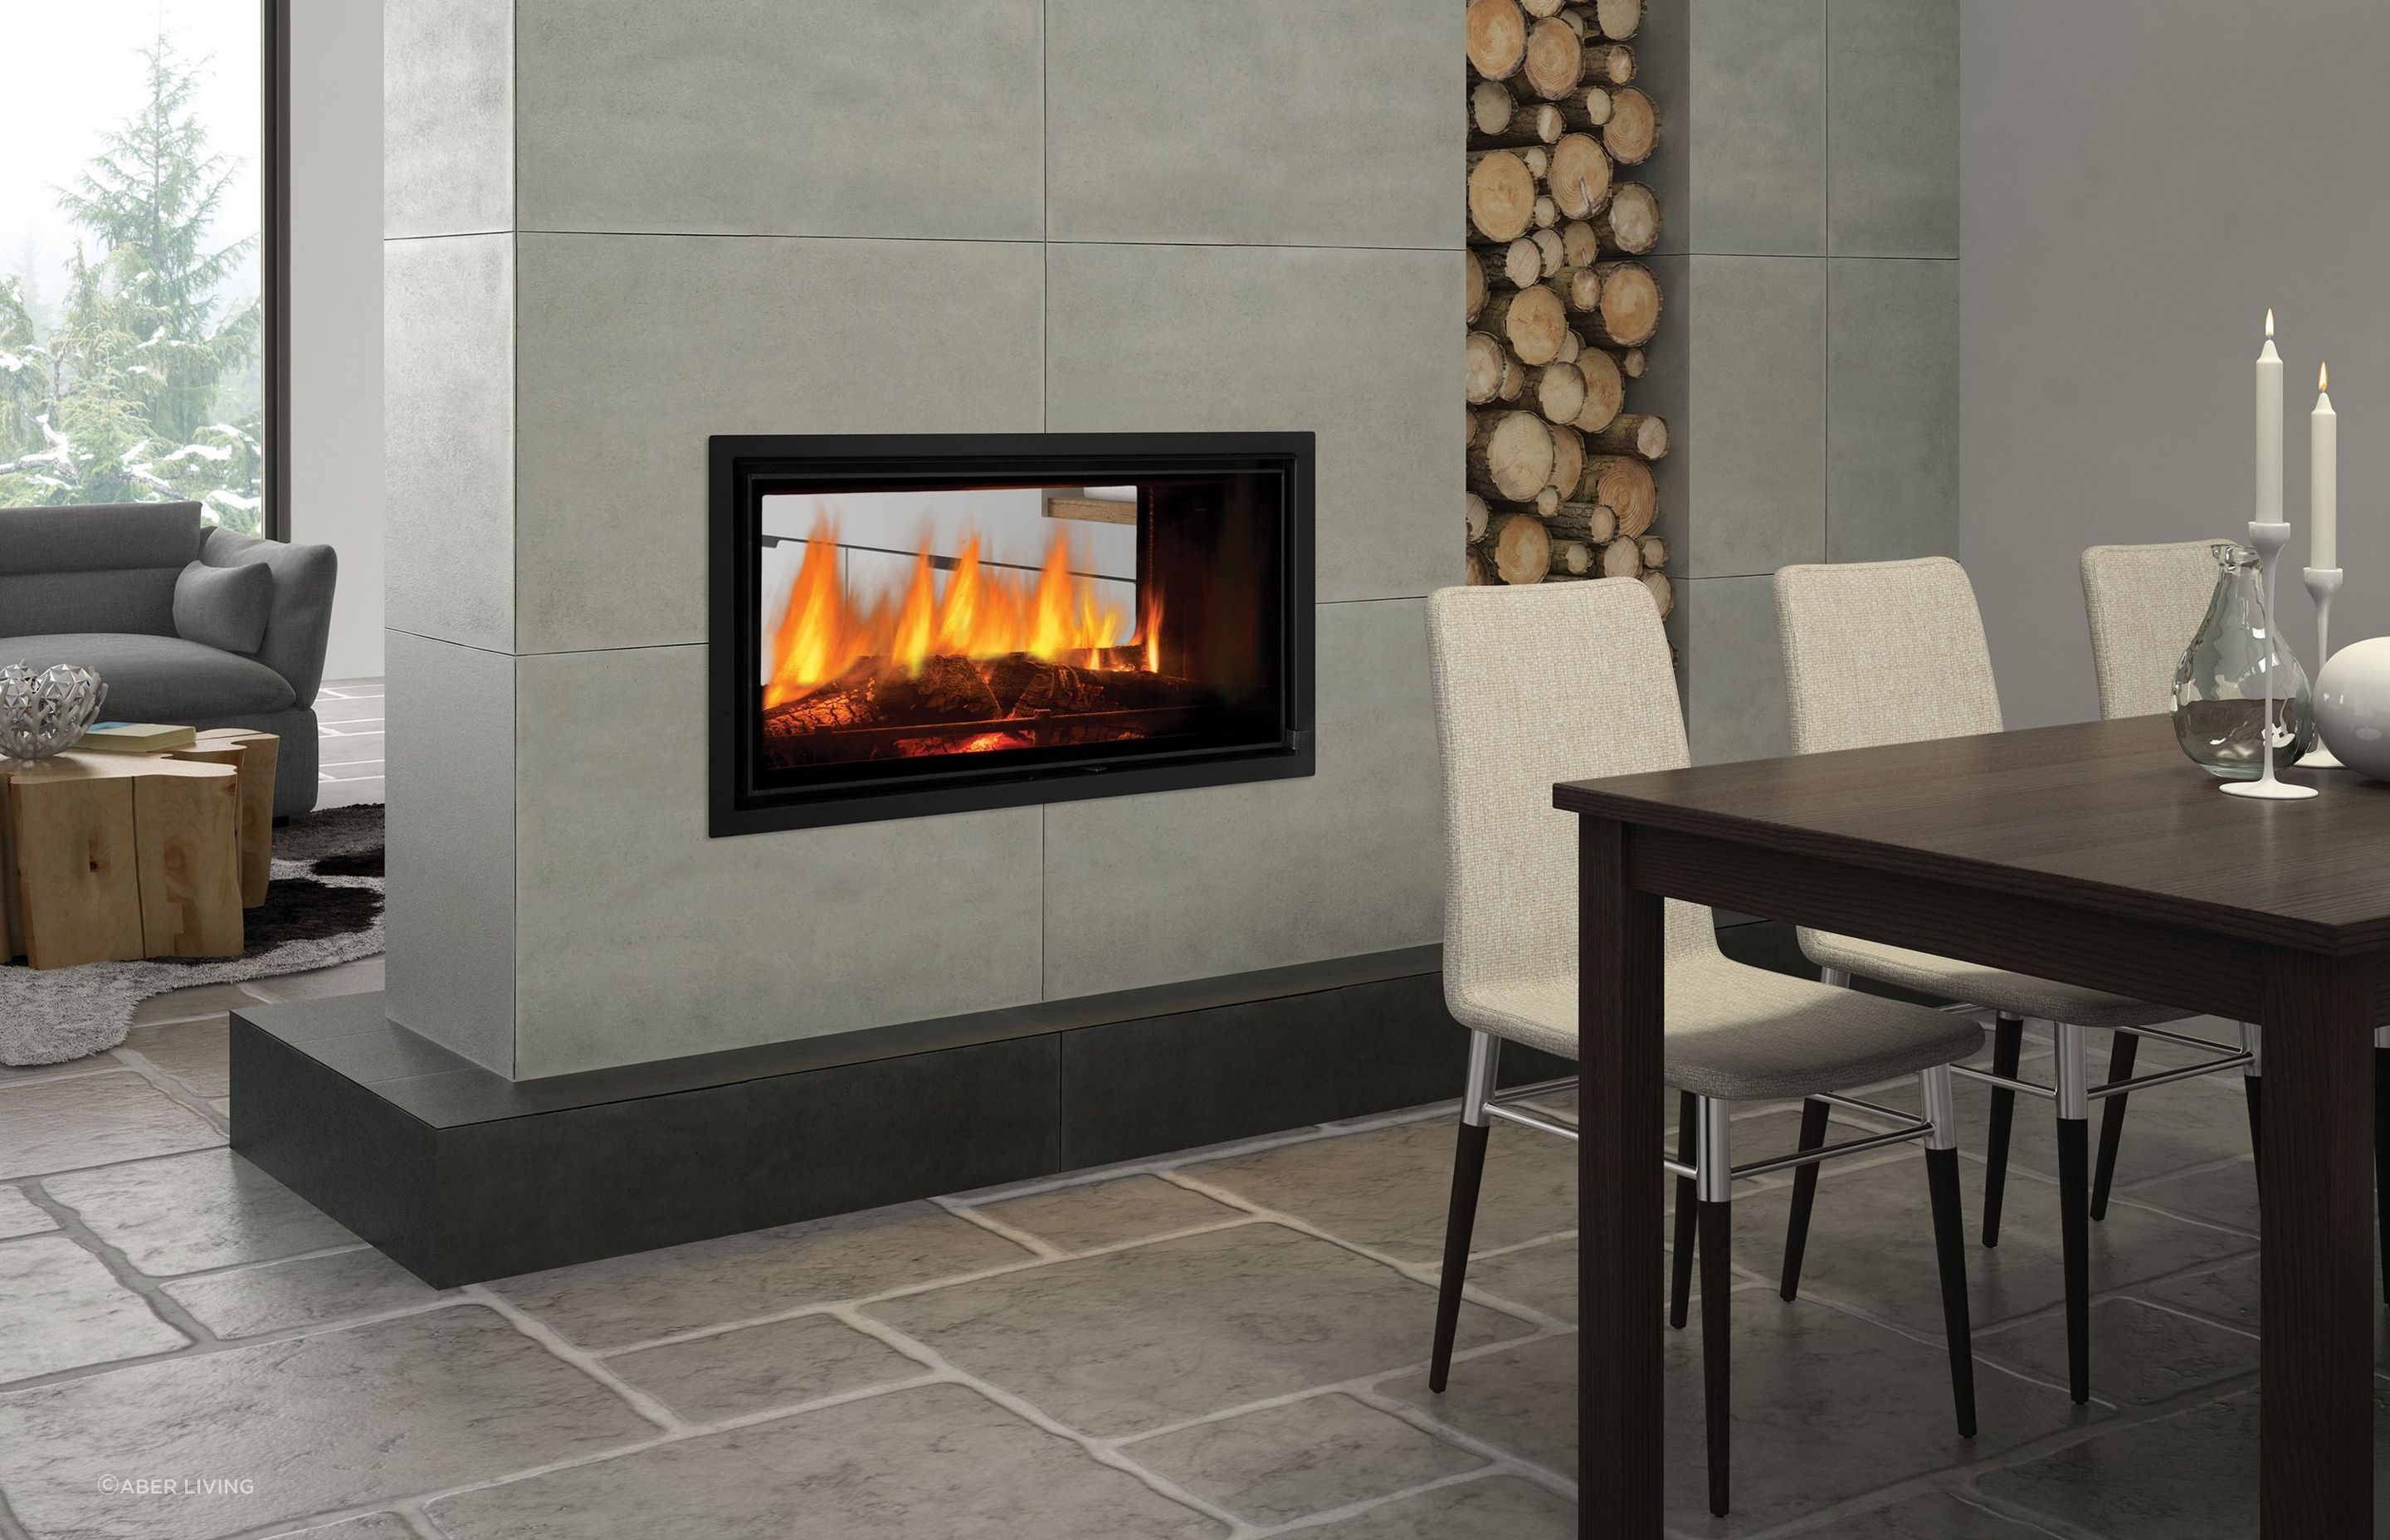 A see through fireplace is an elegant way to divide two spaces while retaining some feeling of openness.